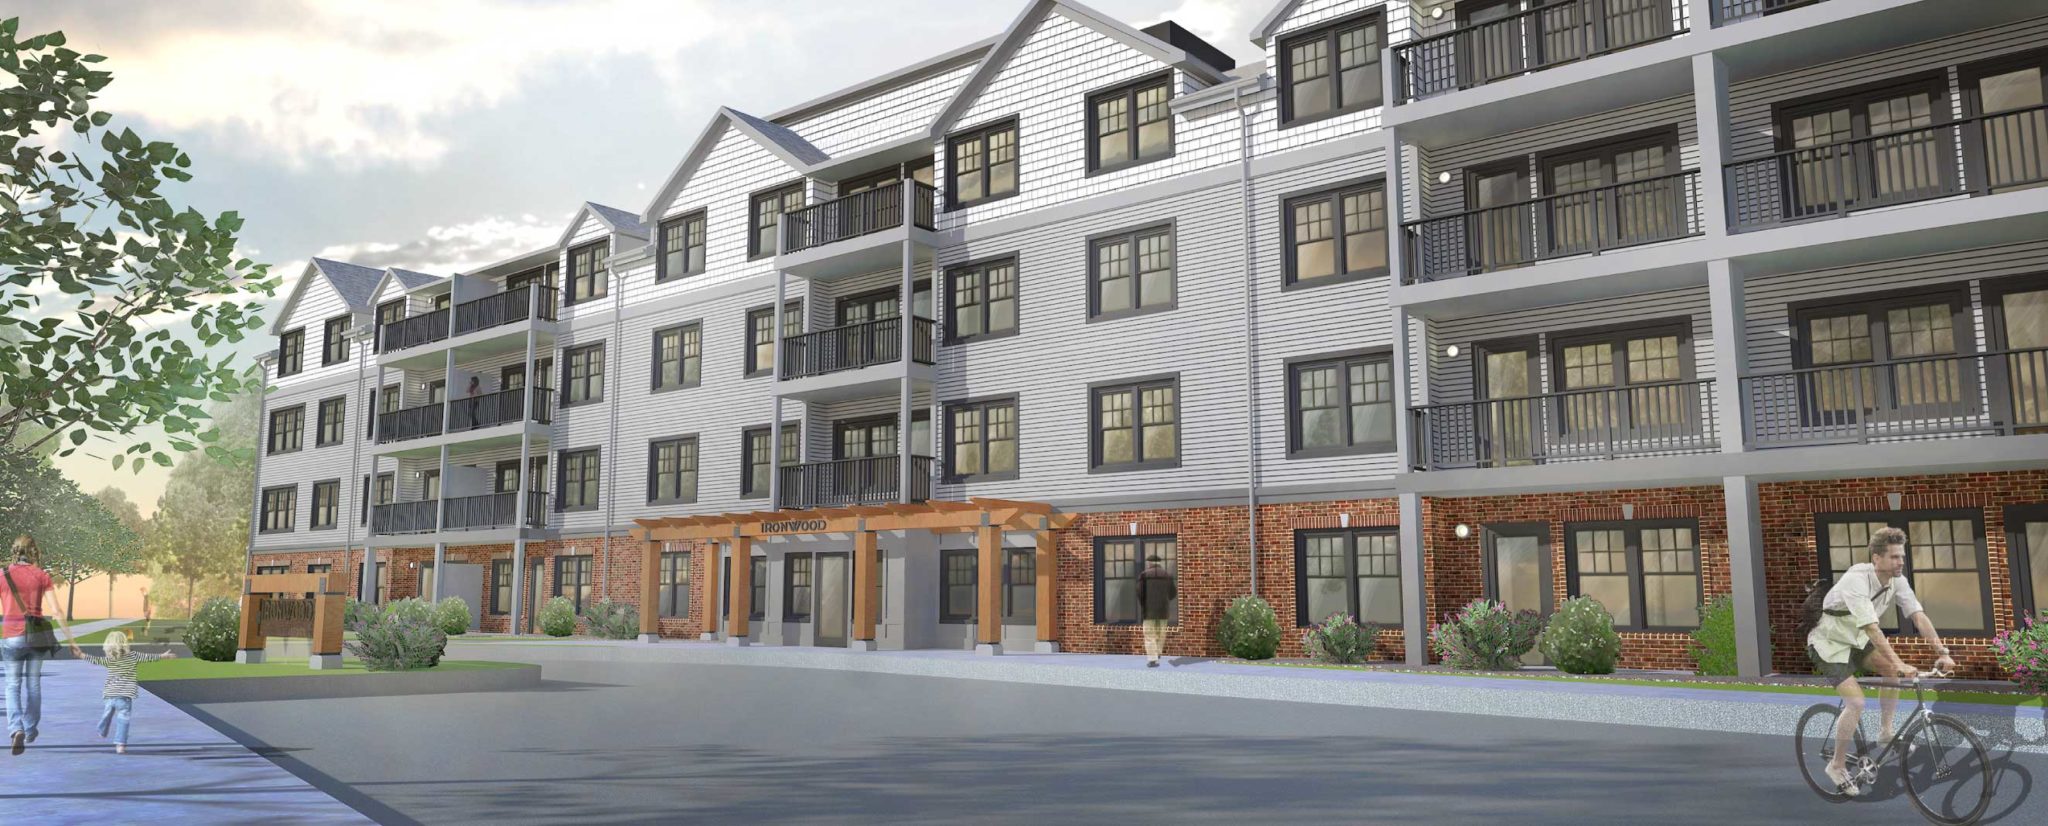 Ironwood Apartments Featured Rendering